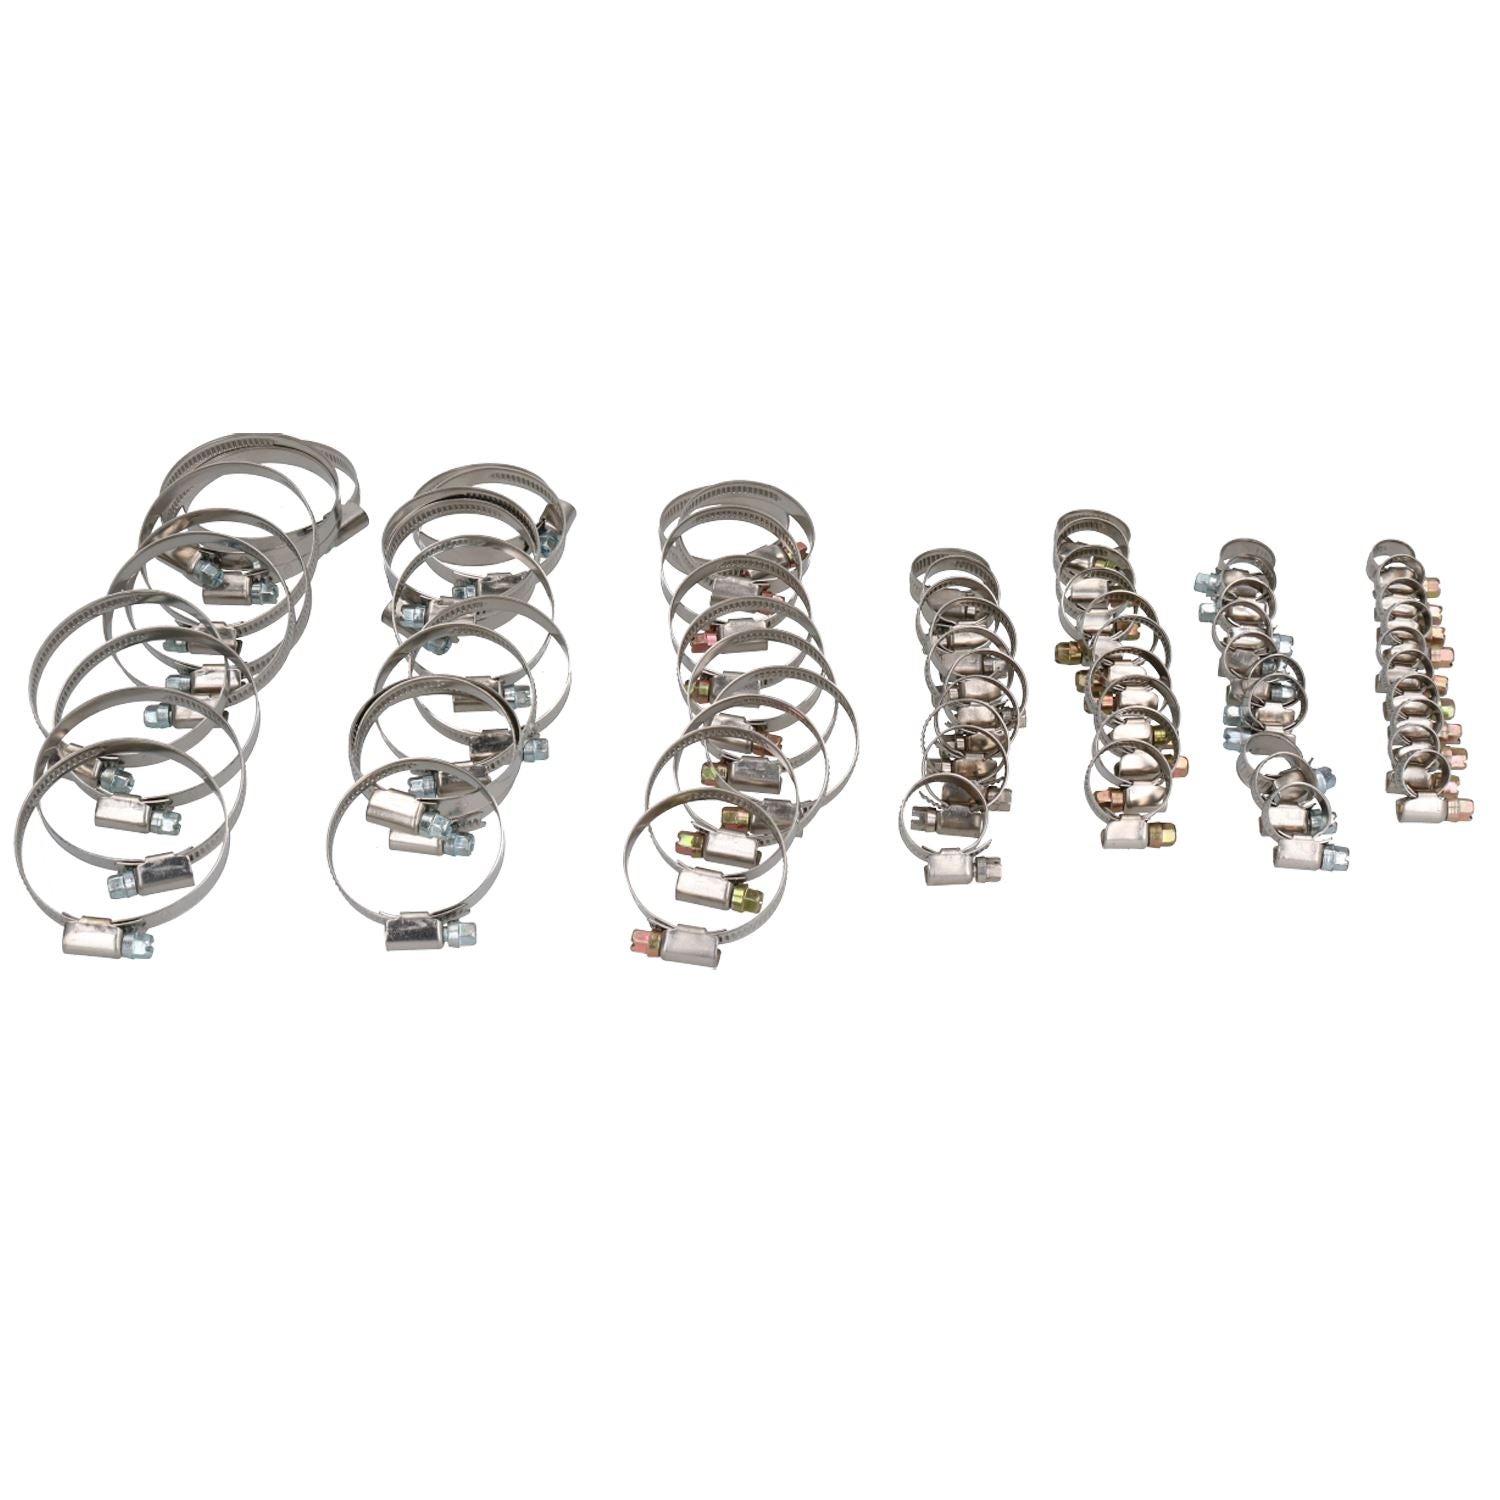 Assorted Jubilee Hose Pipe Clamps Clips For Air Water Fuel Gas 8mm – 60mm 70pc